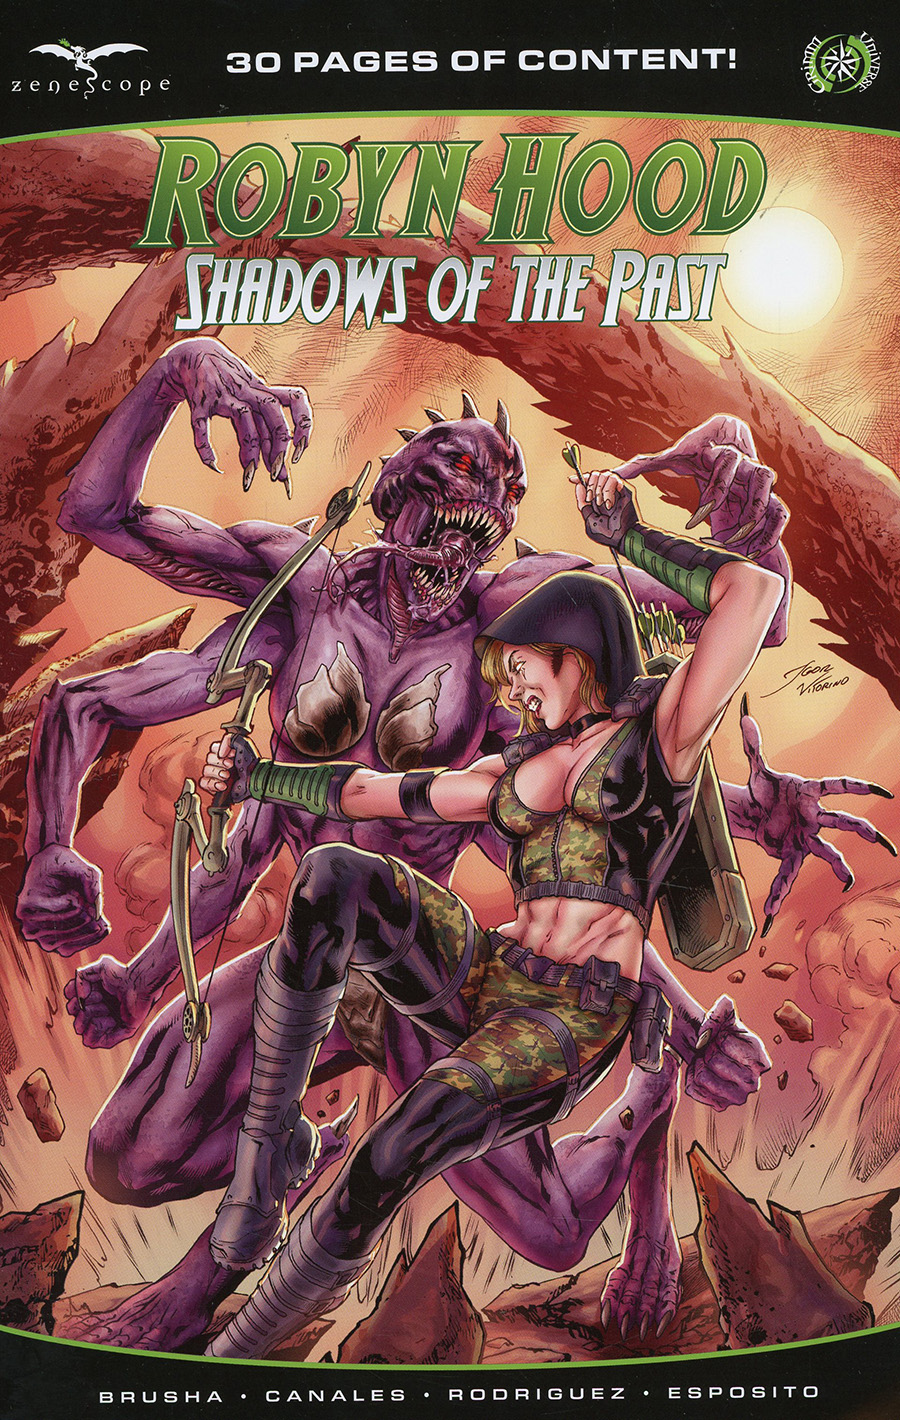 Grimm Fairy Tales Presents Robyn Hood Shadows Of The Past #1 (One Shot) Cover B Igor Vitorino